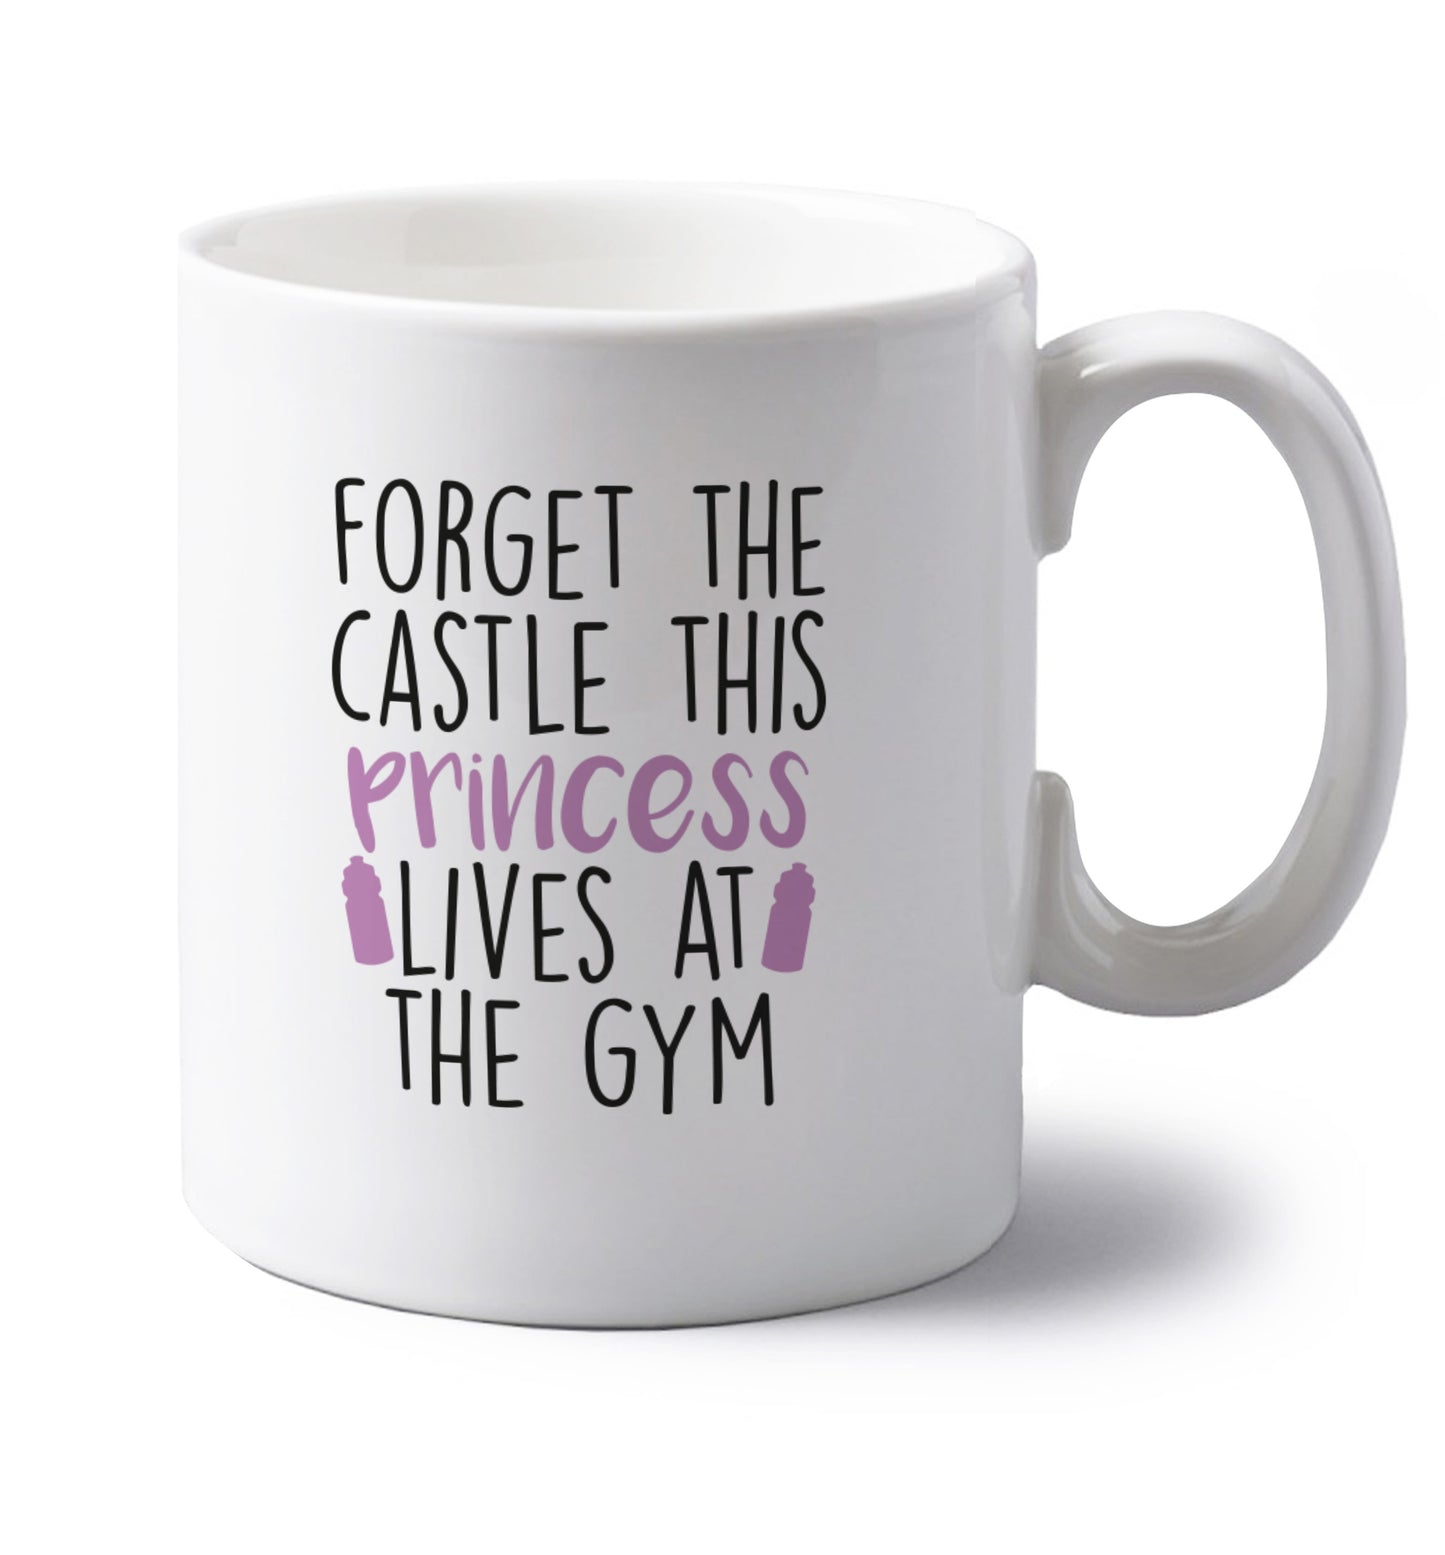 Forget the castle this princess lives at the gym left handed white ceramic mug 